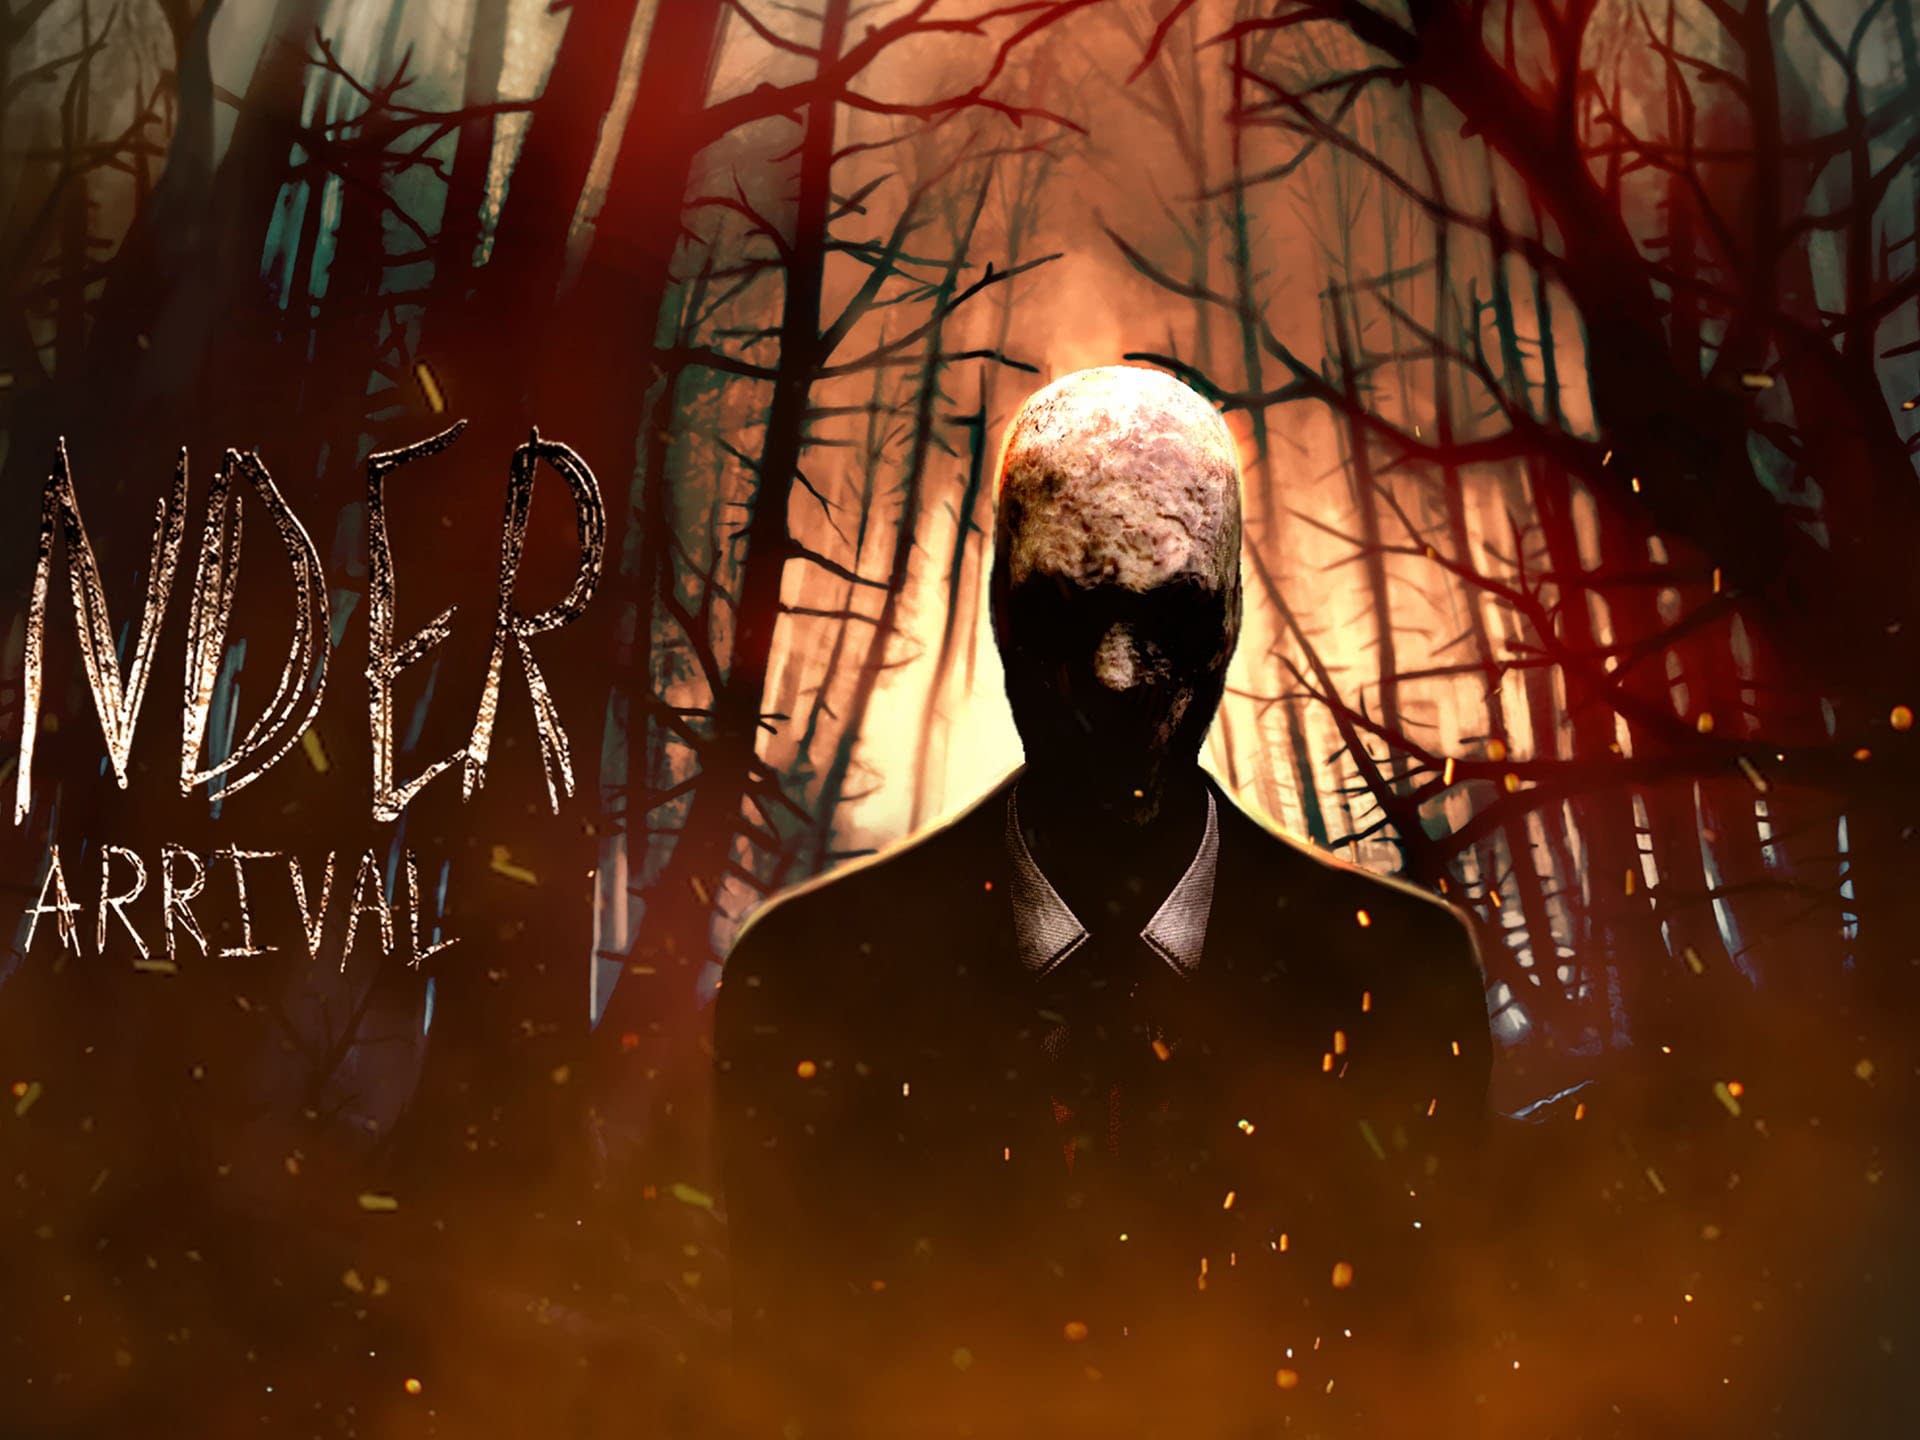 Slender: New Graphics and Content Update for The Arrival